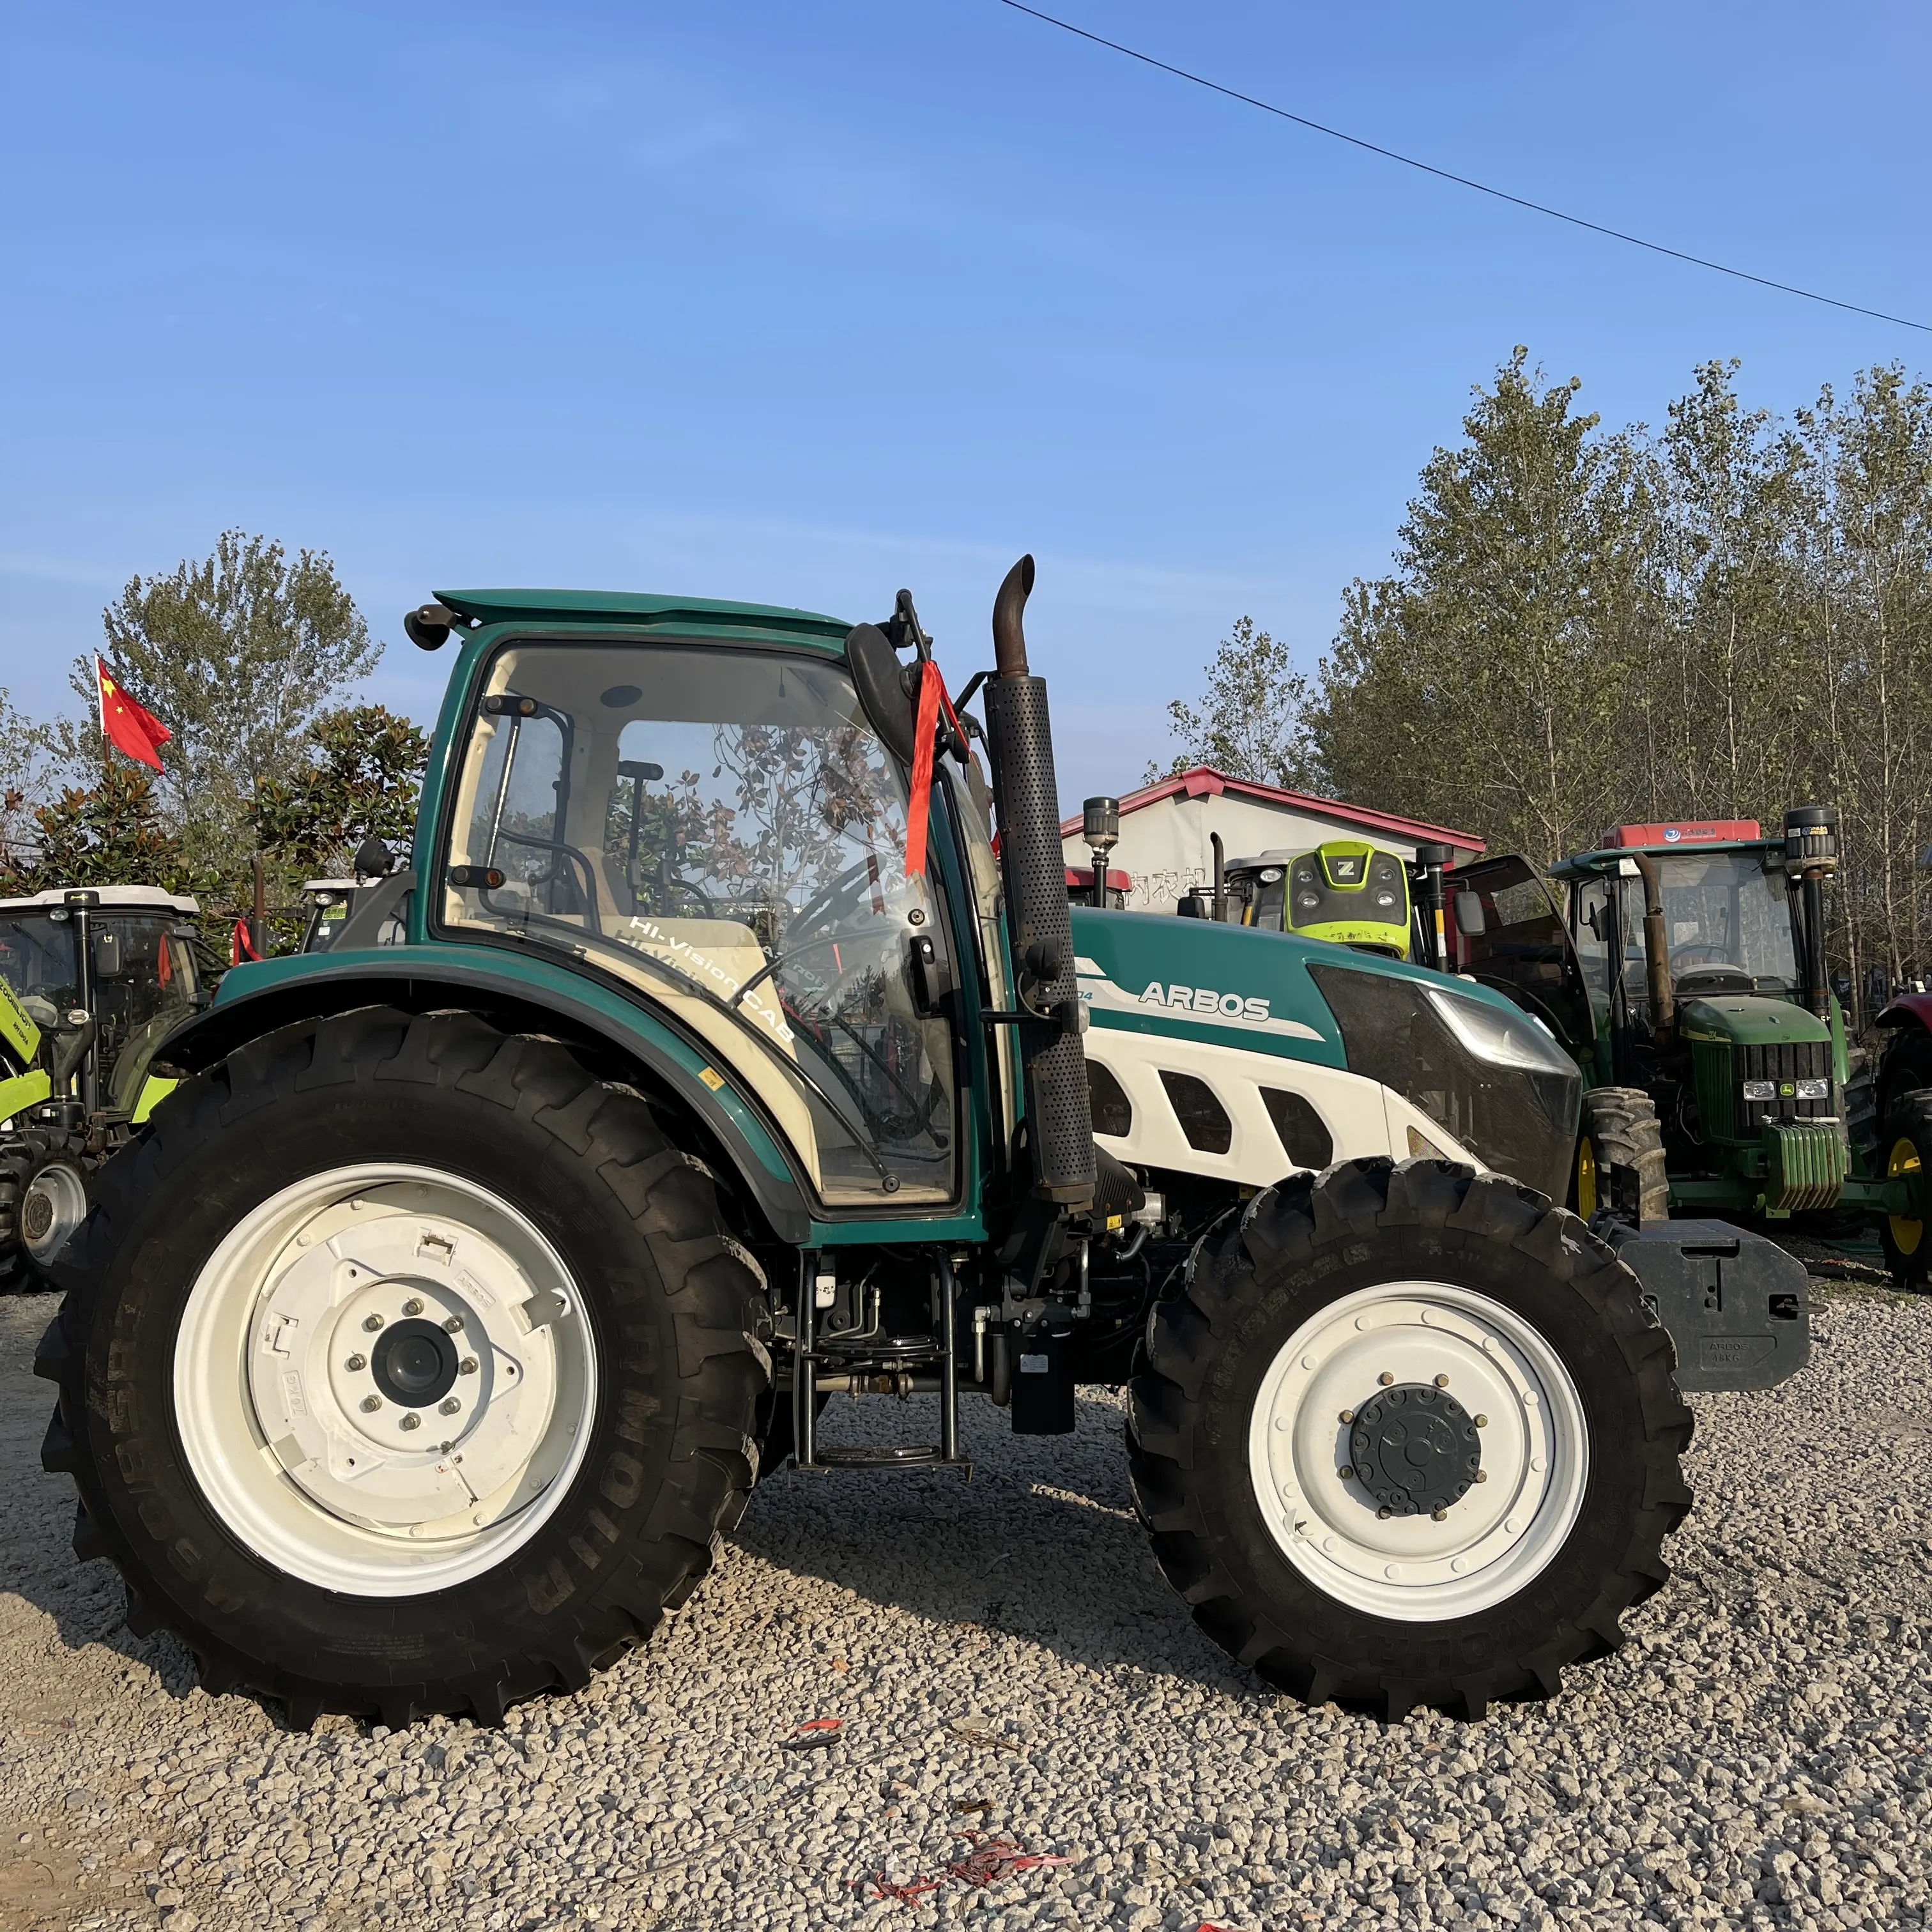 italy used/second hand/new wheel tractor 4x4wd arbos 1204 120hp with small mini farm agricultural equipment machinery loader